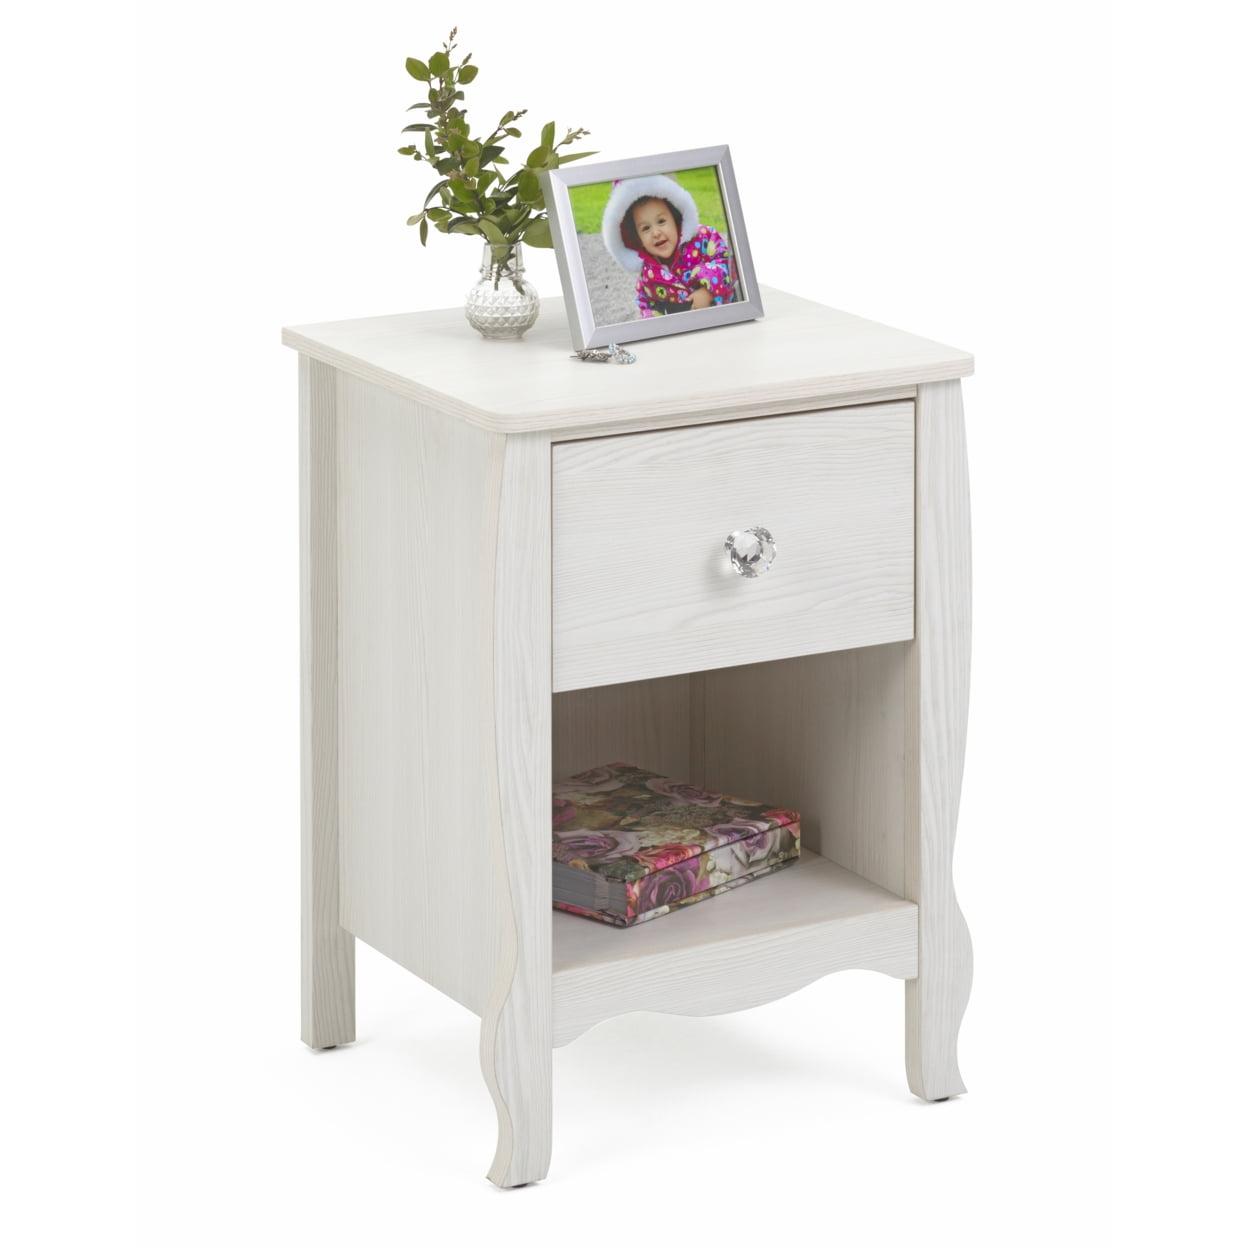 Lindsay Stone White Oak 1-Drawer Nightstand with Crystal Knob